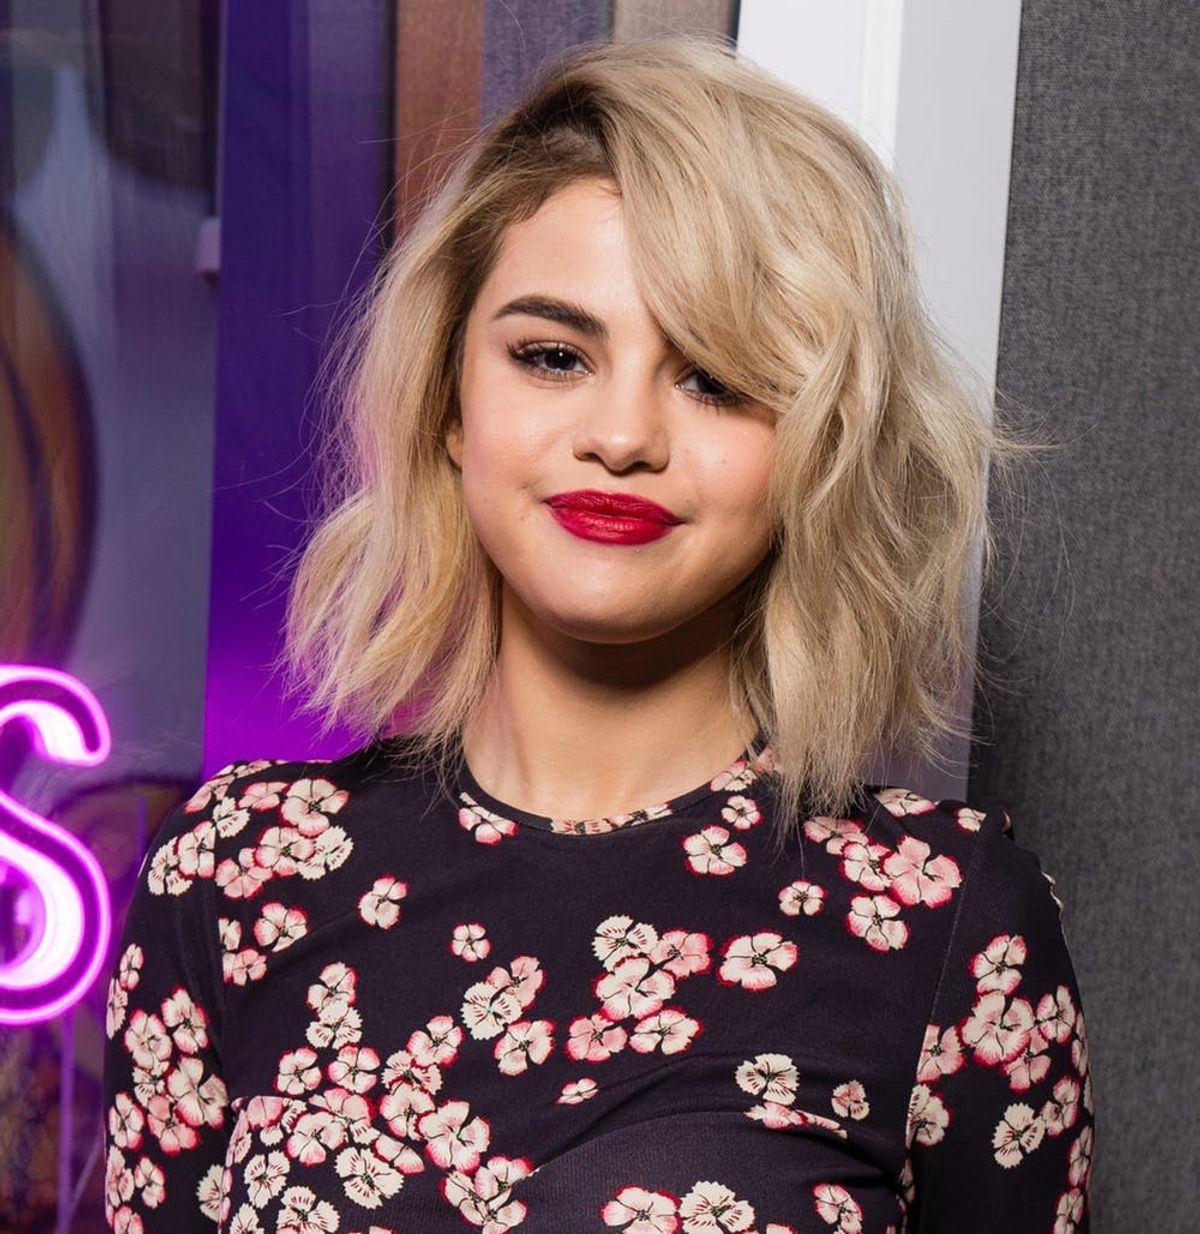 This Is the Emotional Way Selena Gomez Was Involved With ’13 Reasons Why’ Season 2